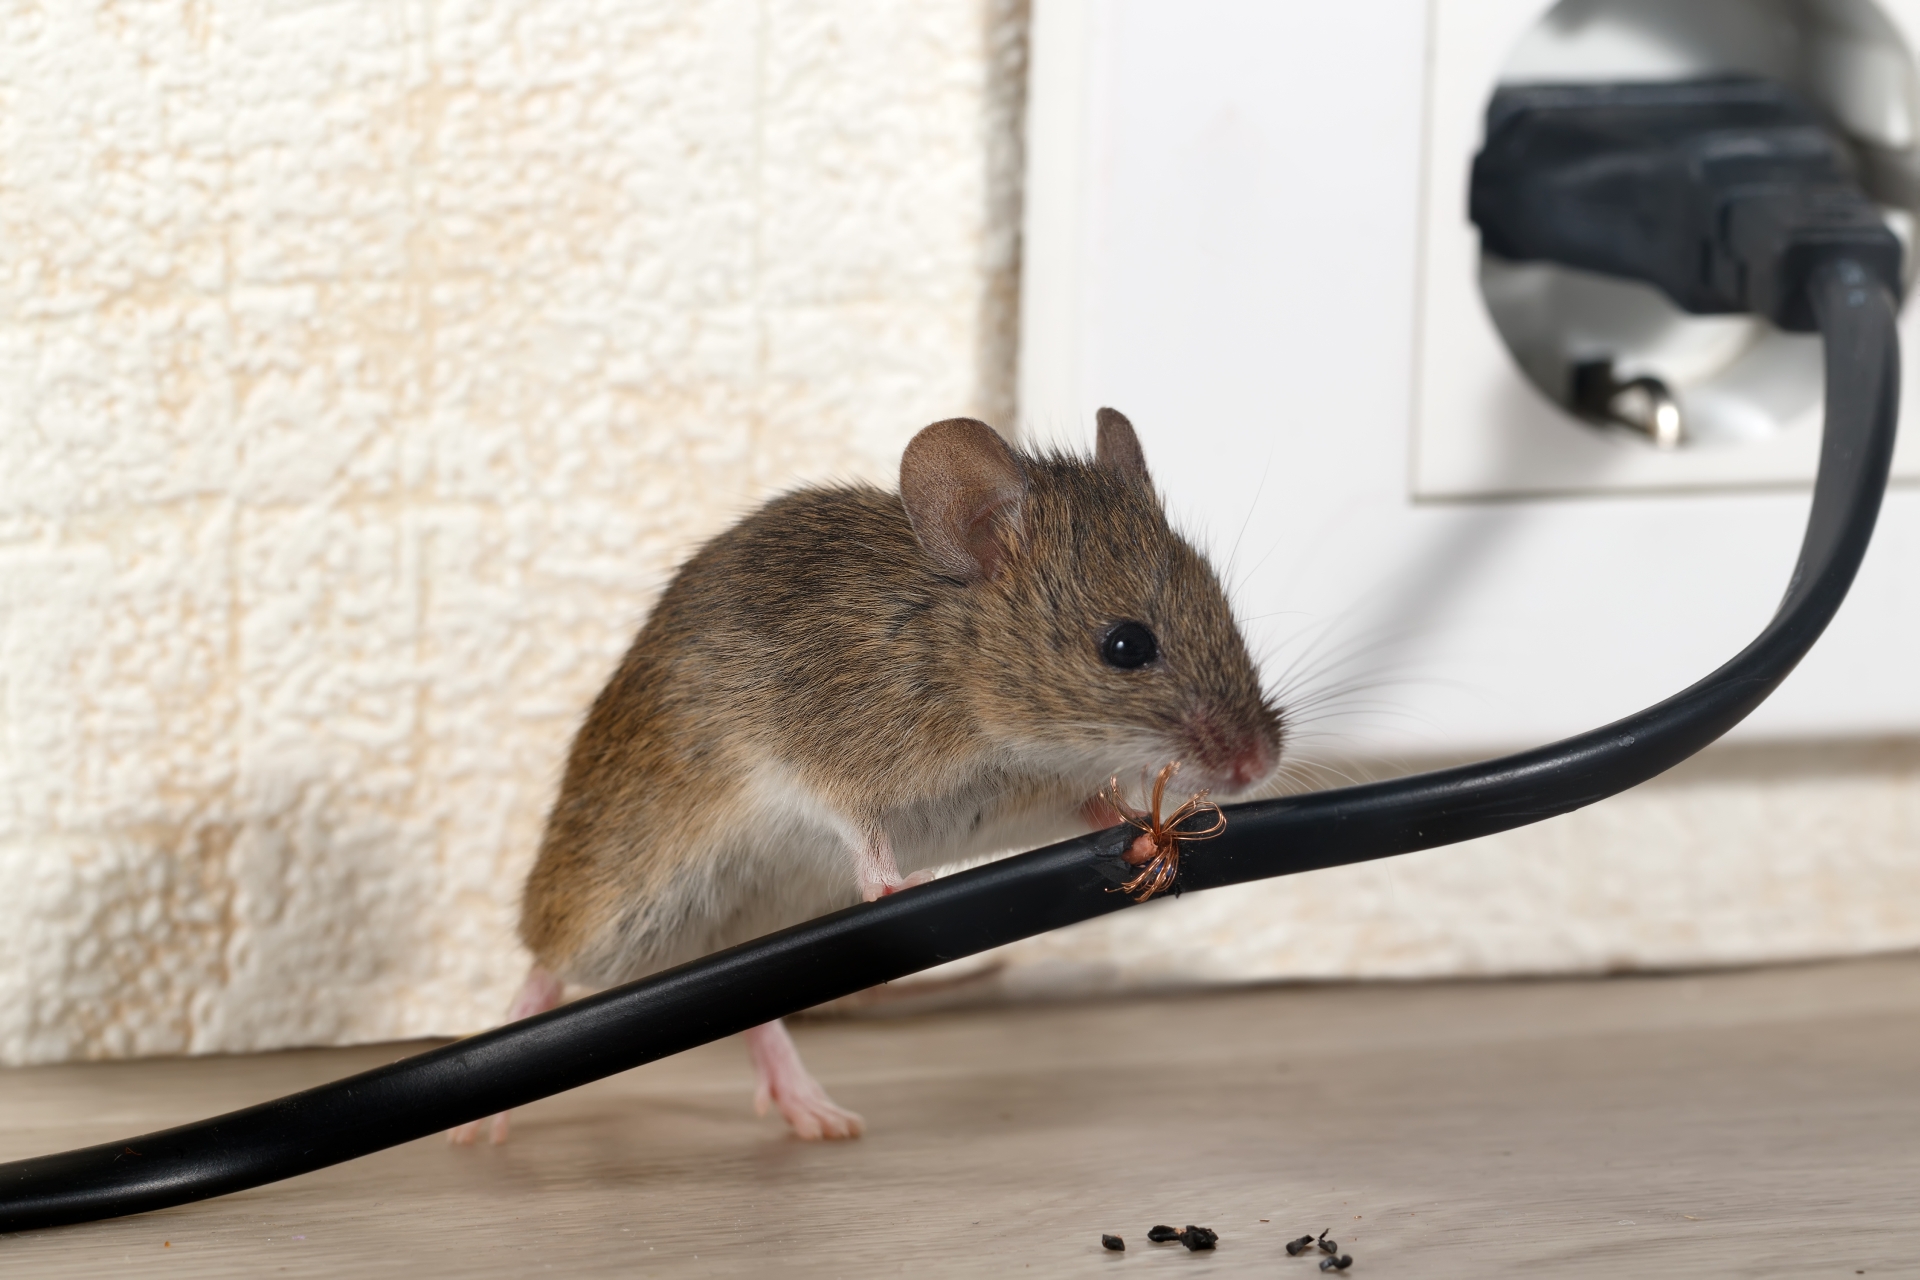 Mice Infestation, Pest Control in Balham, SW12. Call Now 020 8166 9746